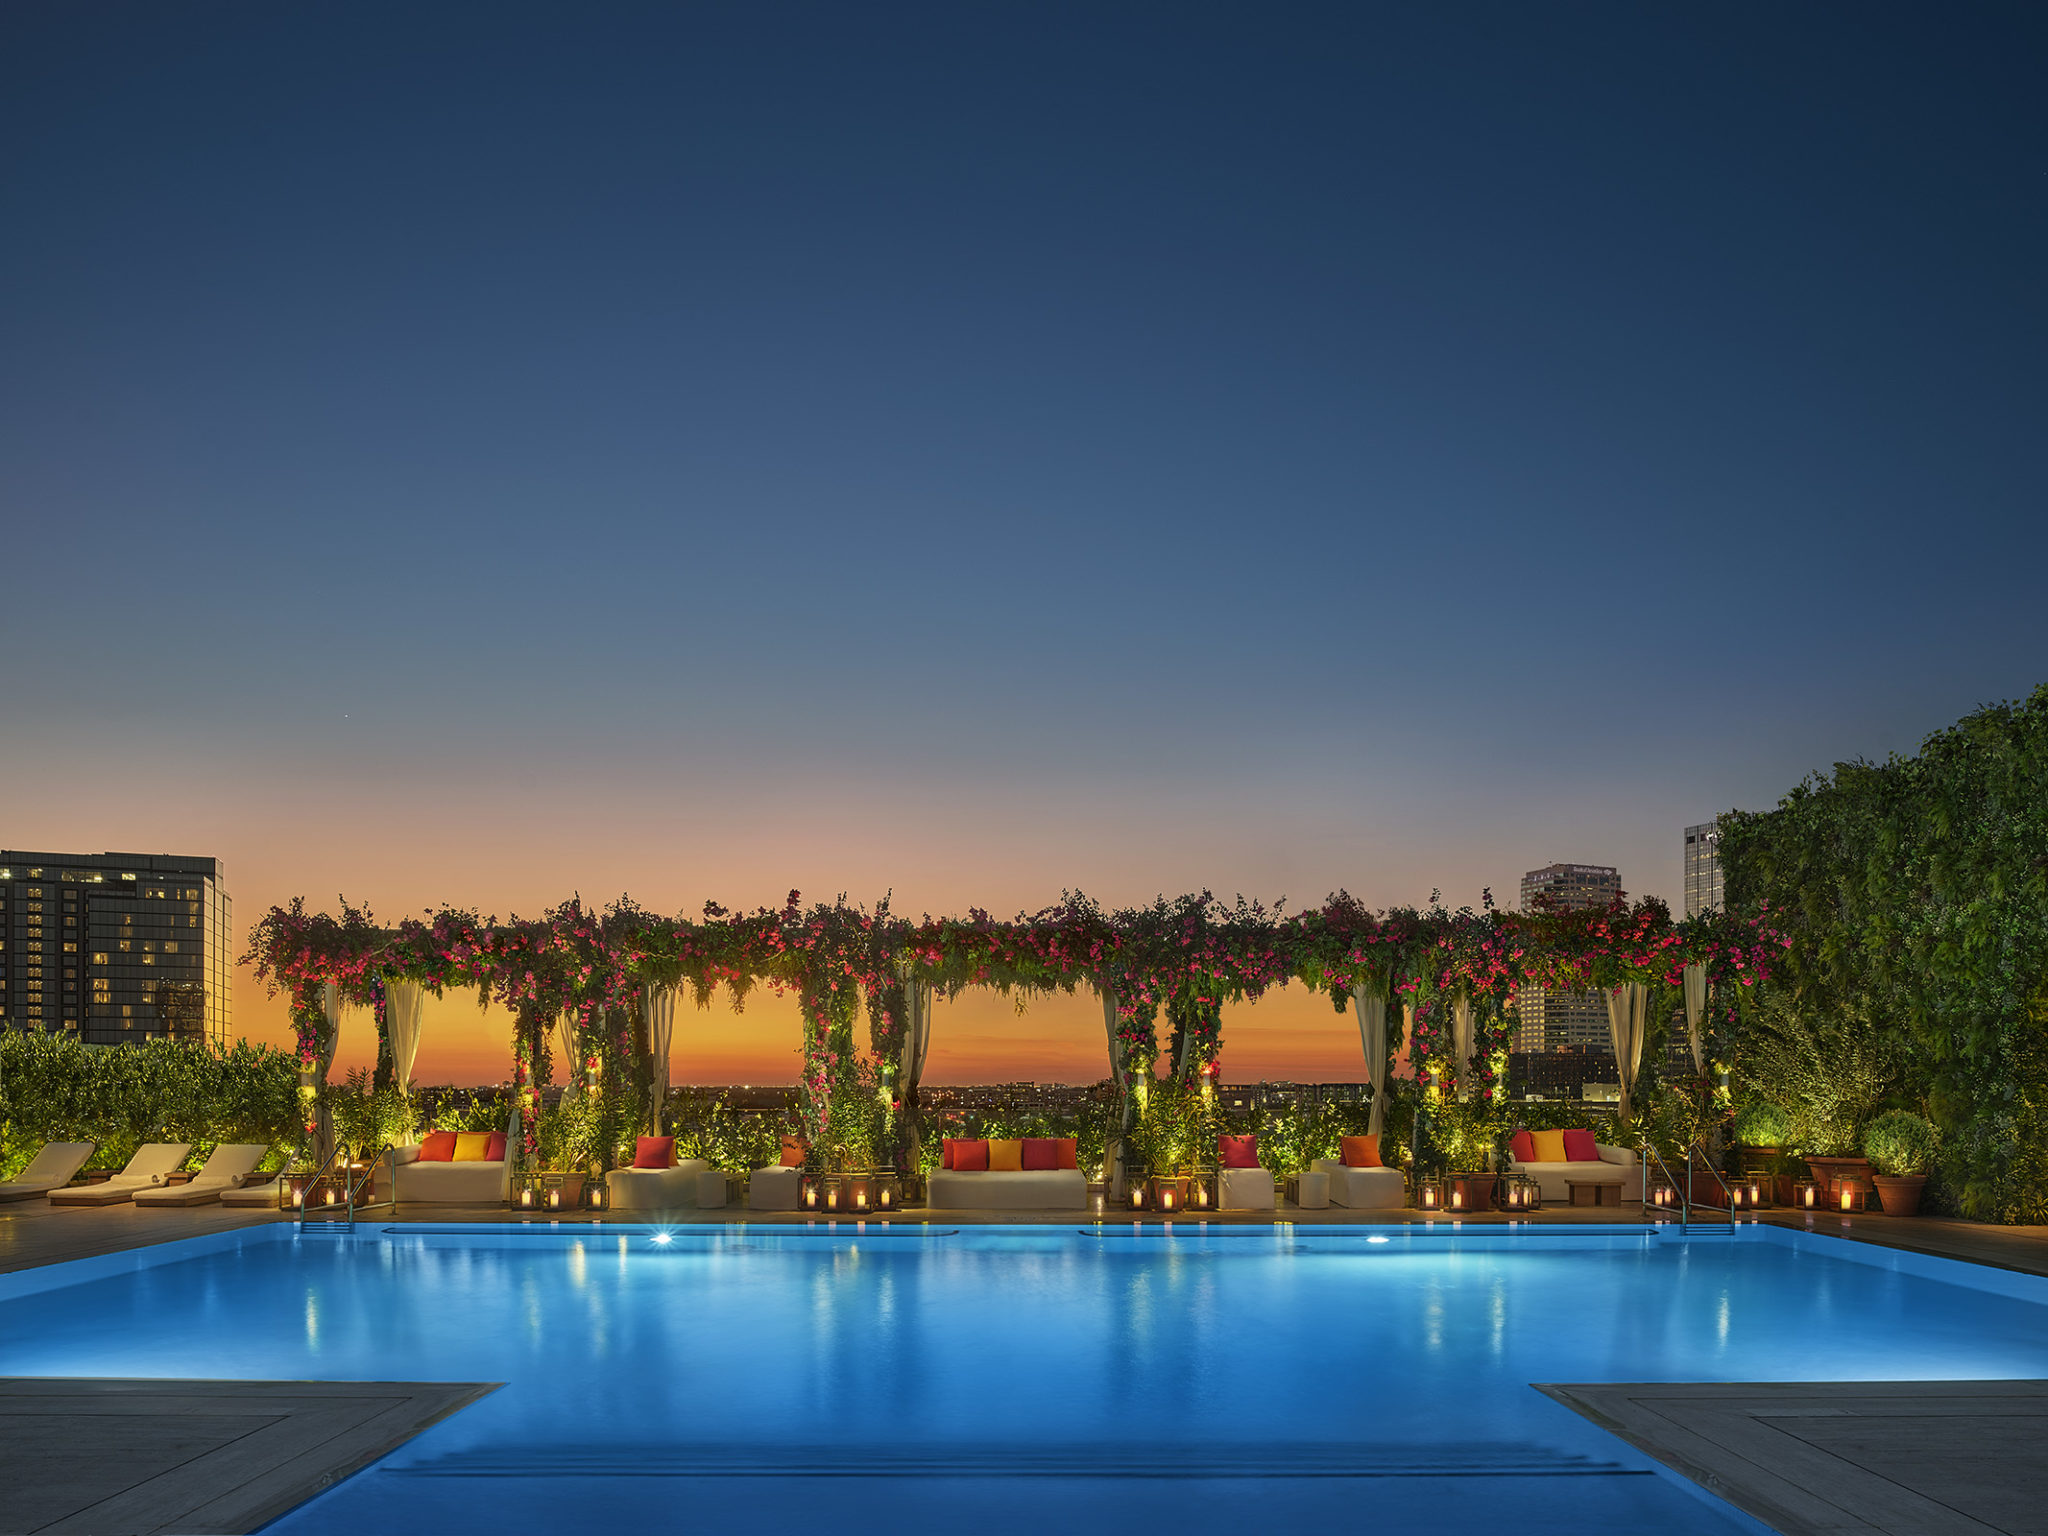 Lit pool lined with floral vine covered gazebo lounge space at night